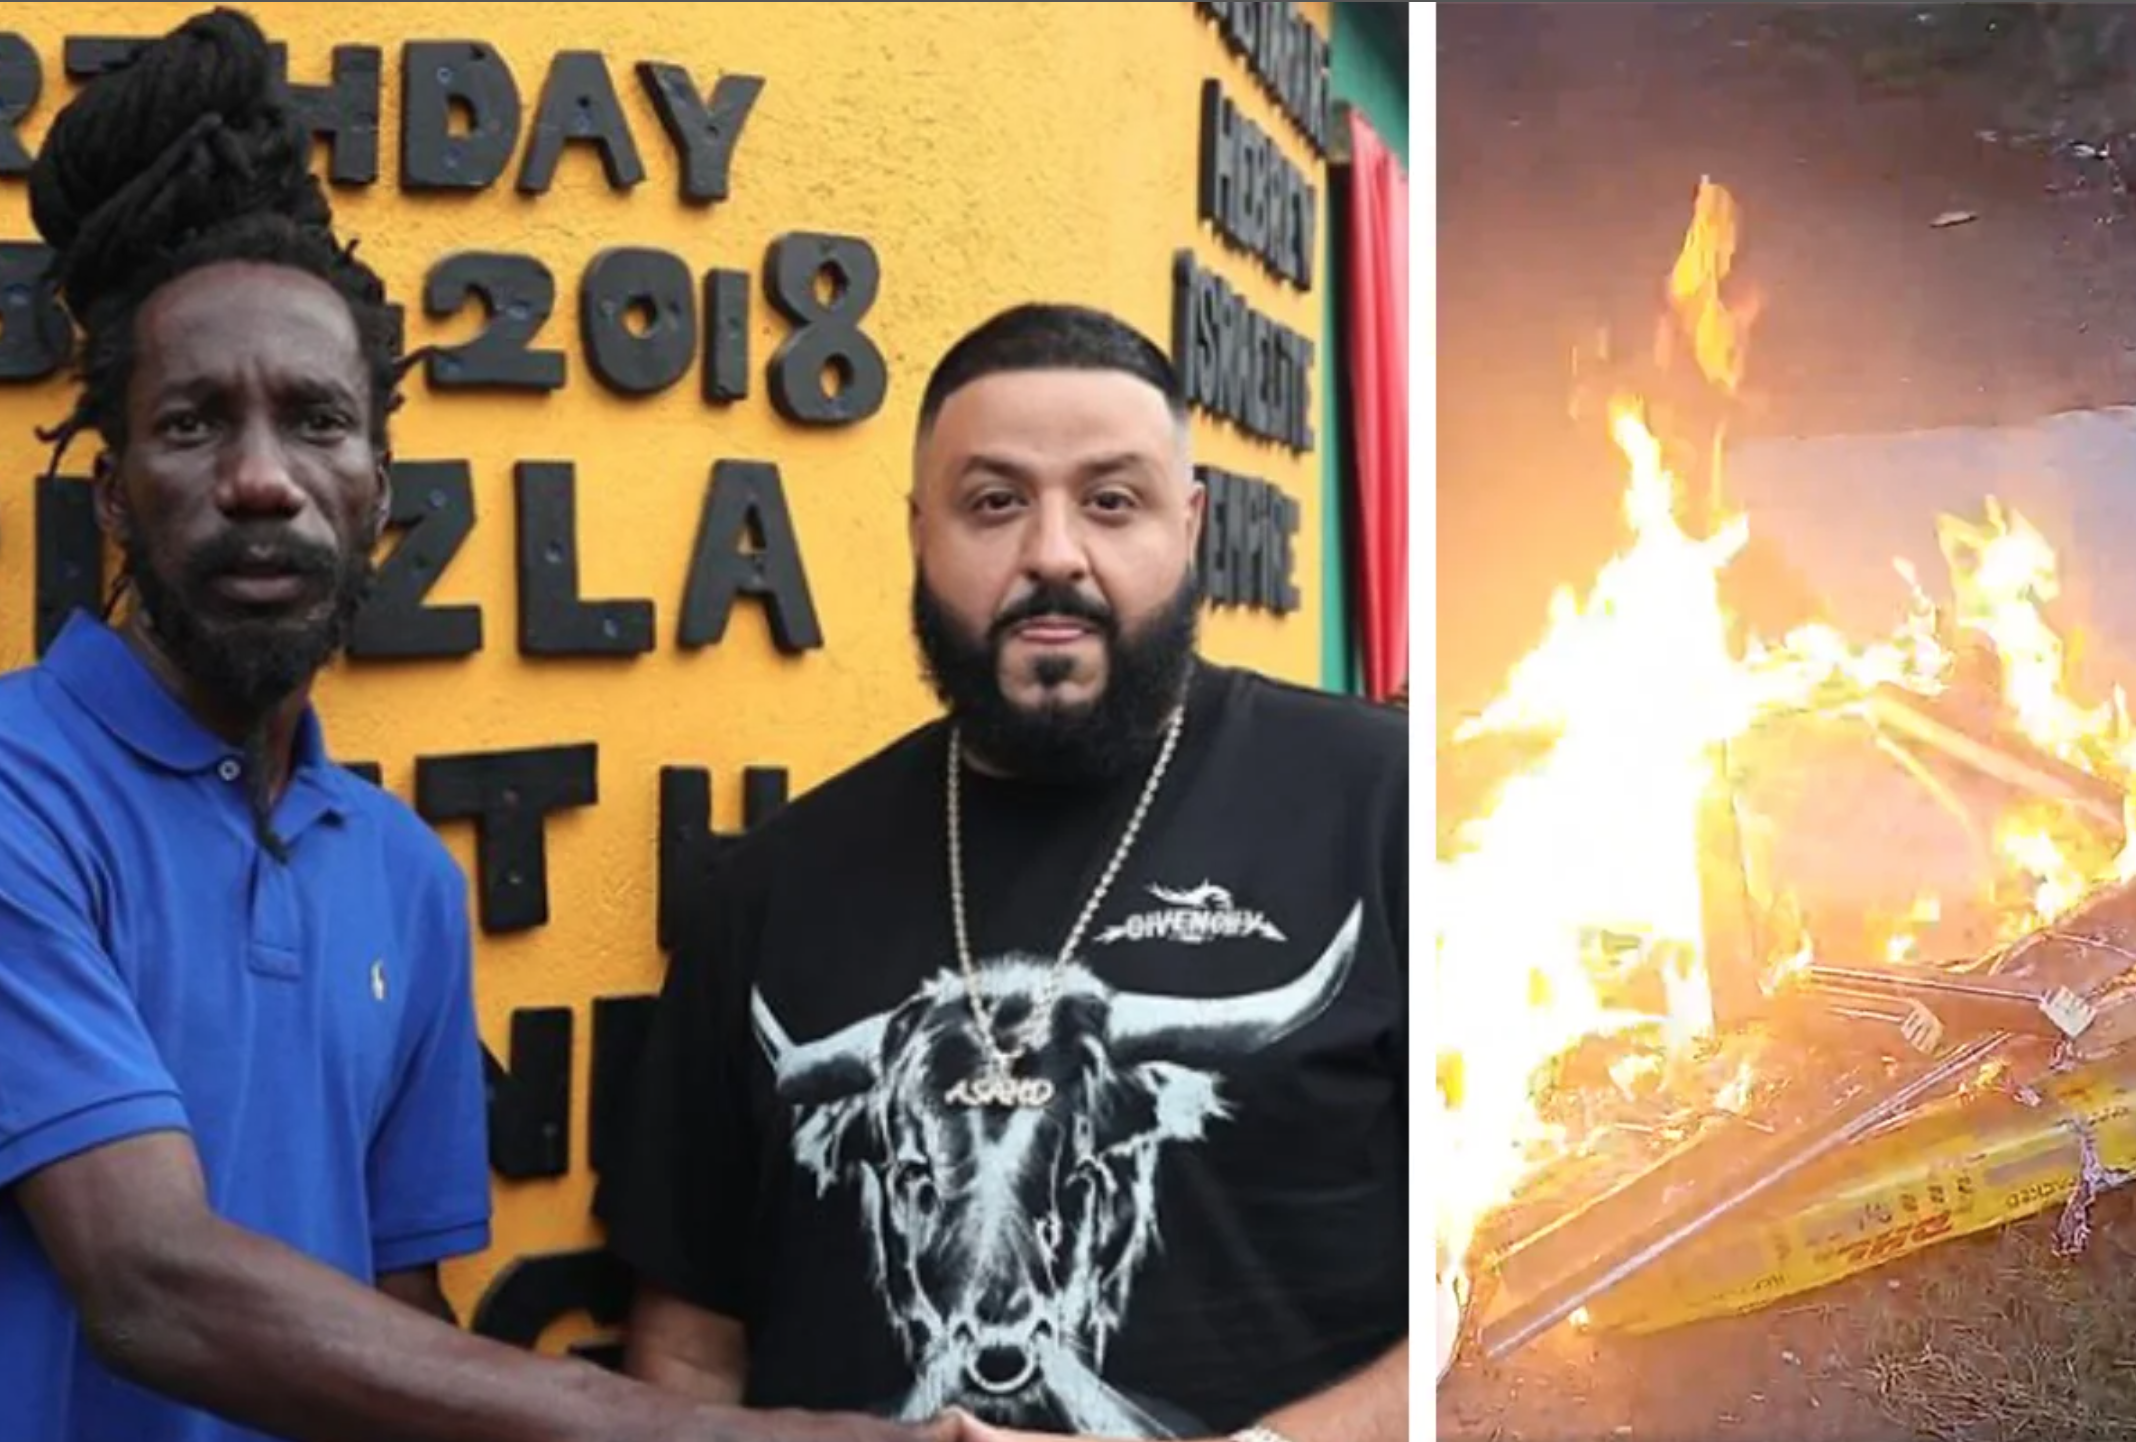 Sizzla Burns Plaques Over ‘Disrespect’ From DJ Khaled: ‘You’re Not The Best, You’re The Worst’